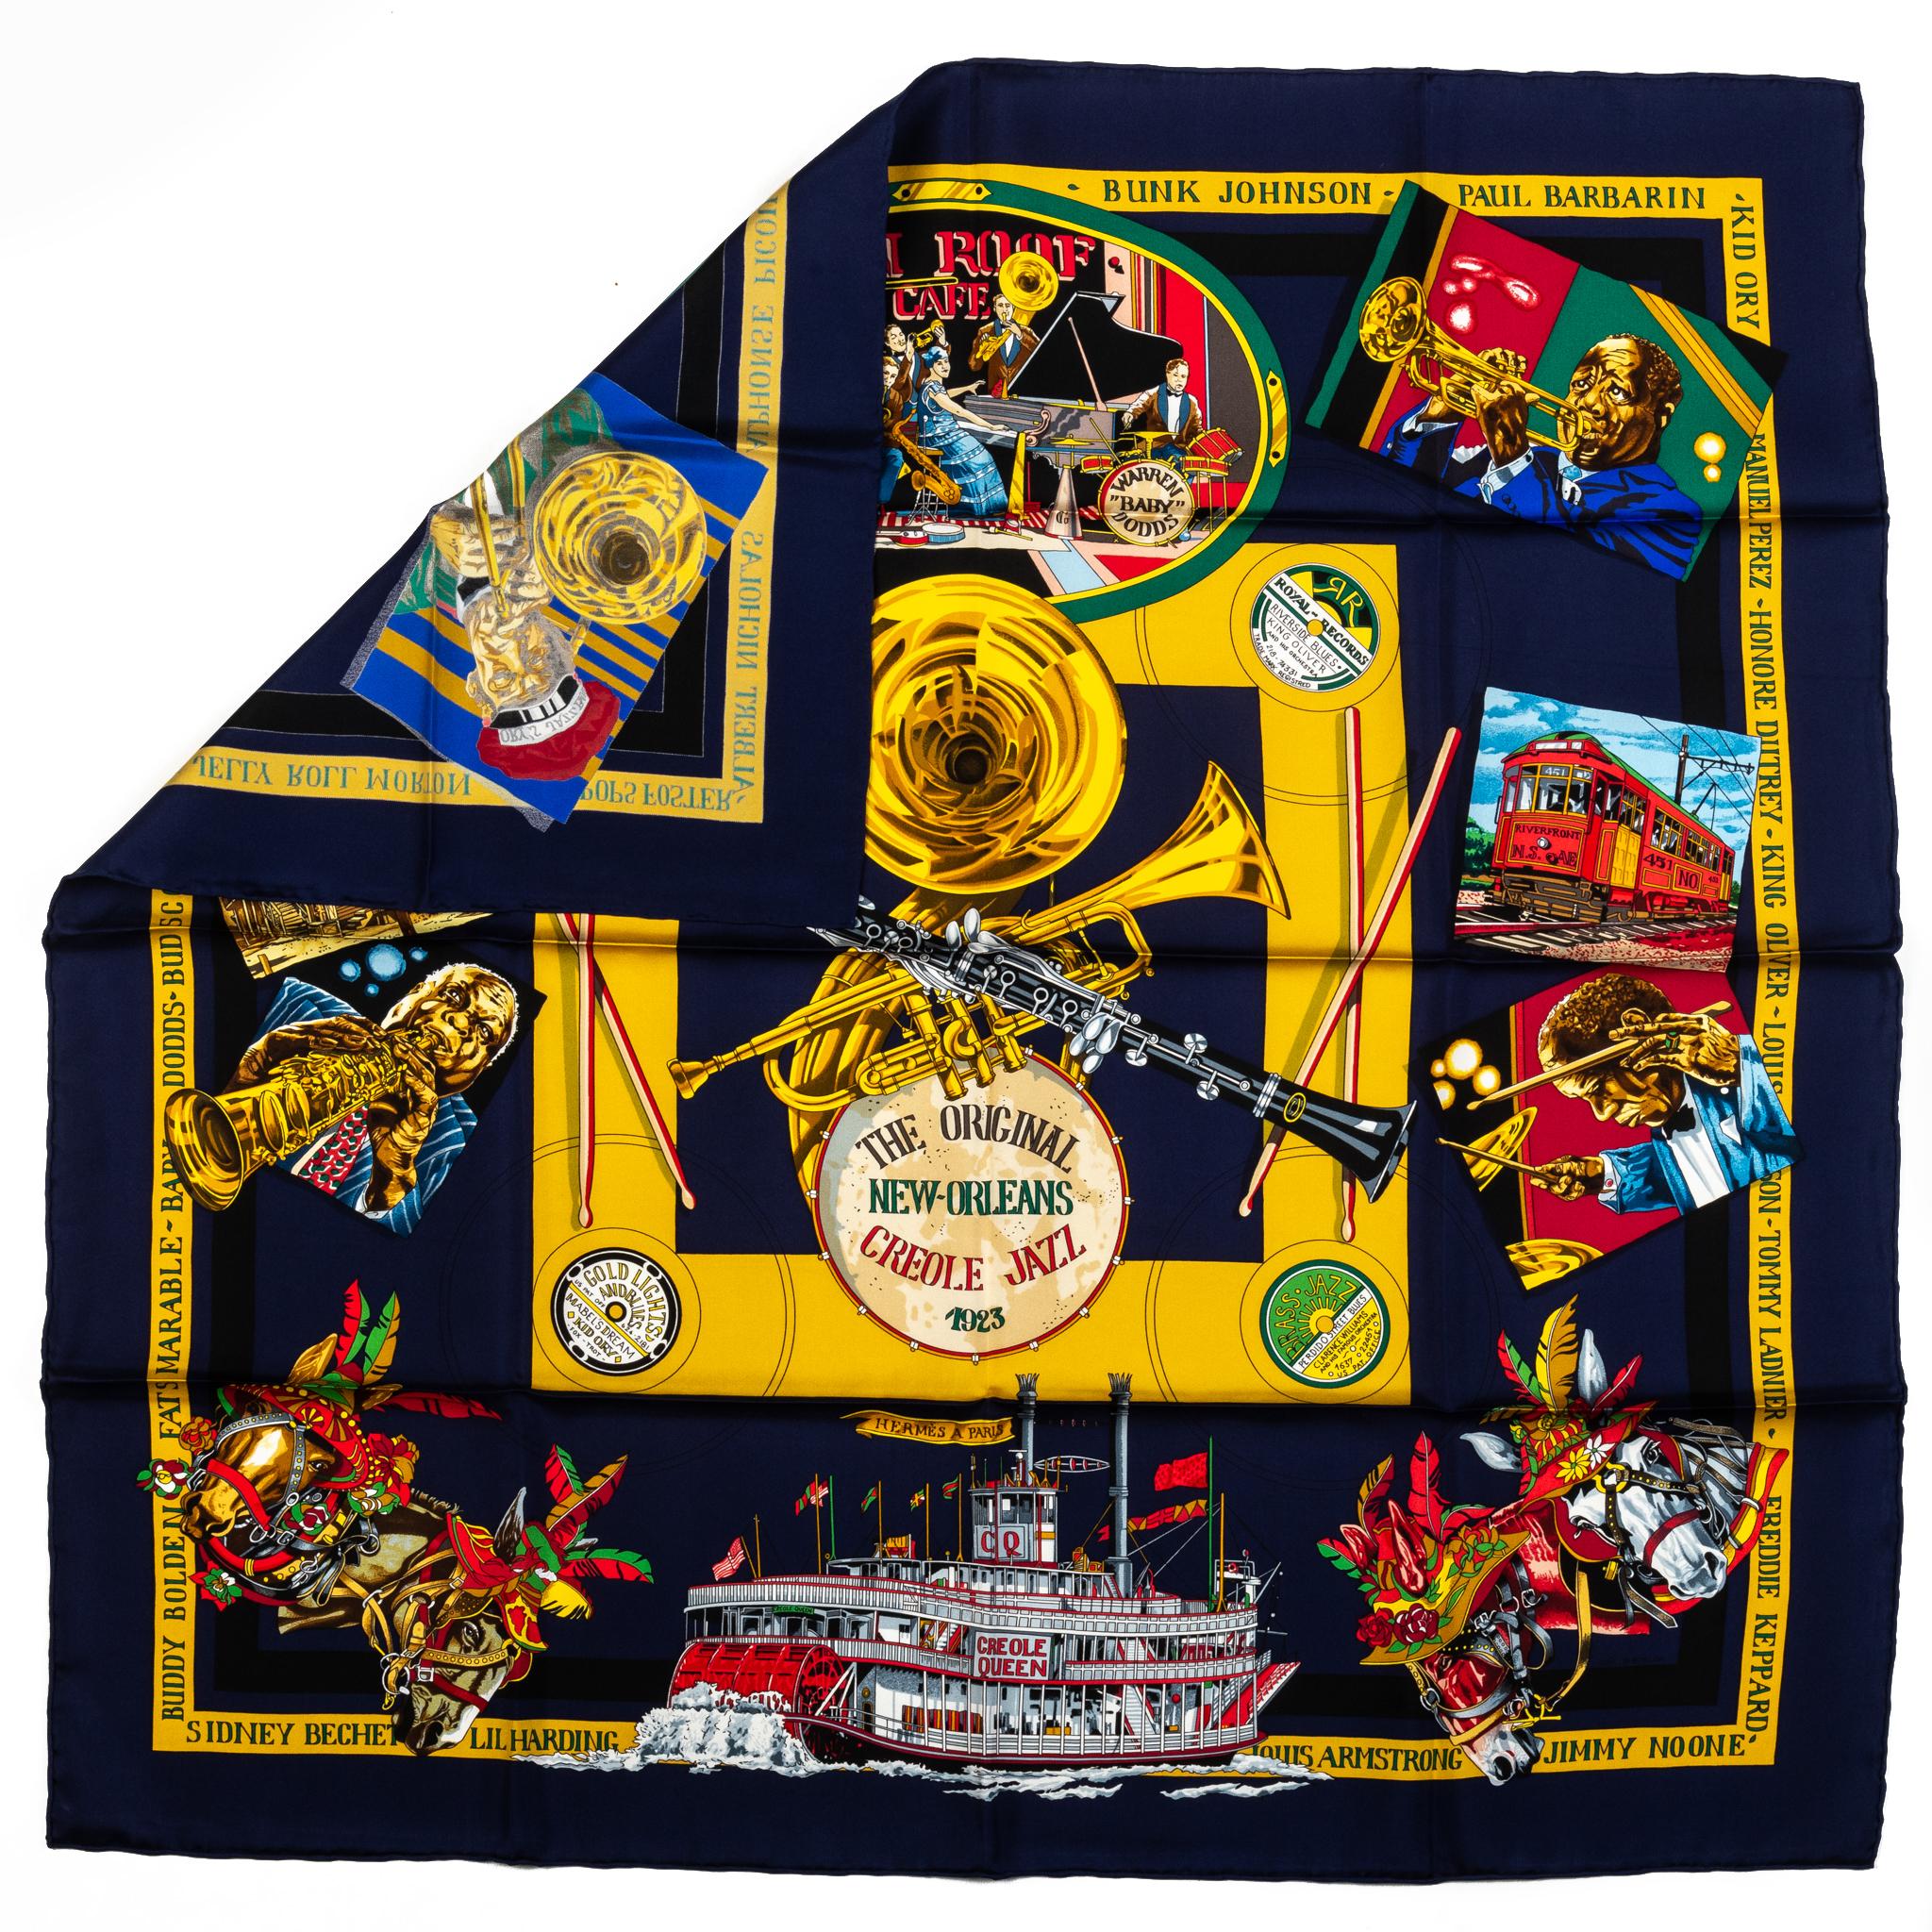 Hermes collectible New Orleans silk scarf in blue and yellow. Hand rolled edges. No box included.
